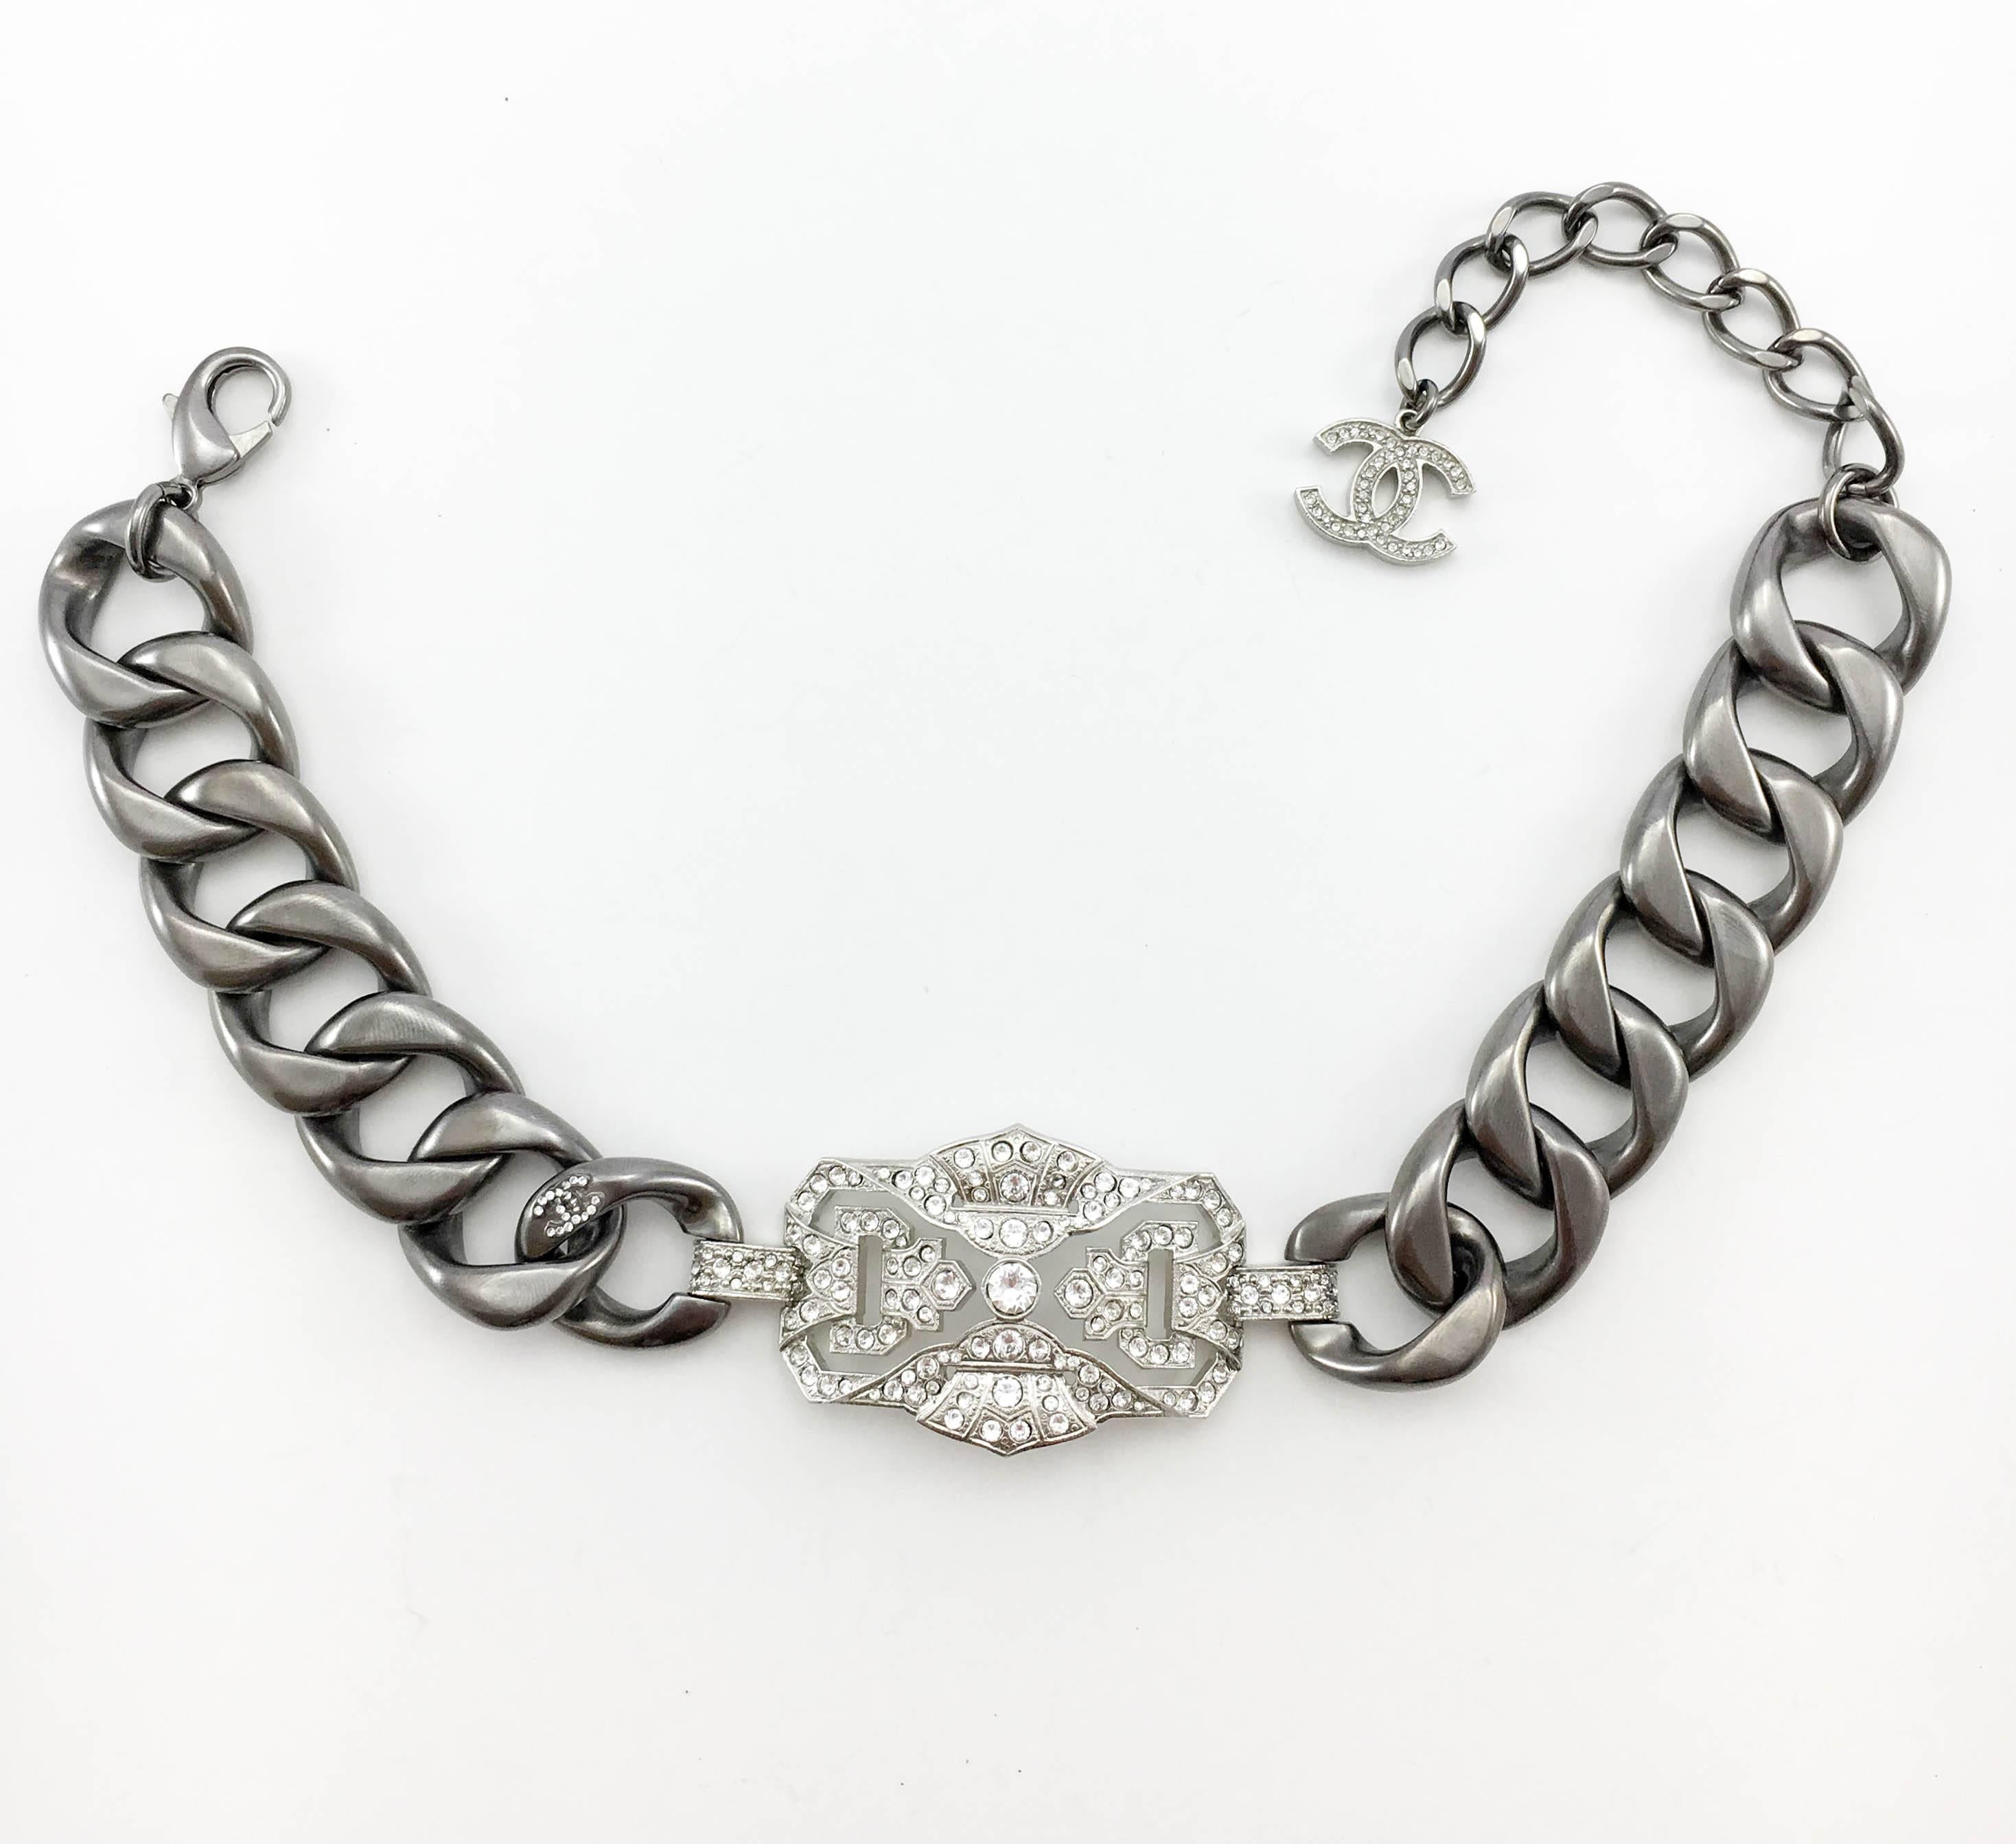 Chanel Runway Look Diamanté Embellished Gunmetal Coloured Chunky Chain Choker In Excellent Condition For Sale In London, Chelsea